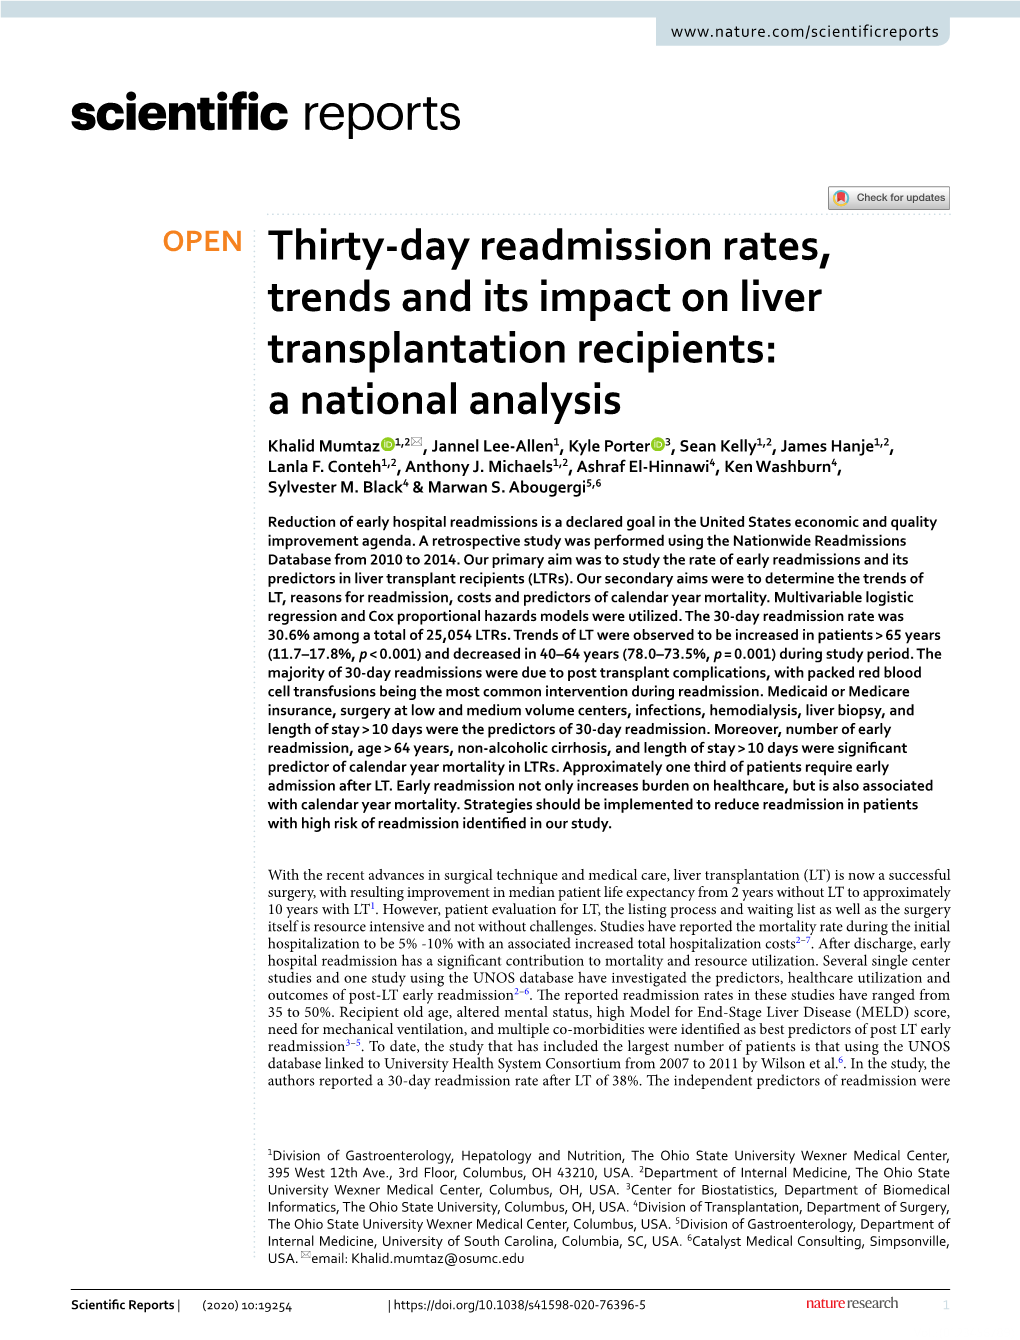 Thirty-Day Readmission Rates, Trends and Its Impact on Liver